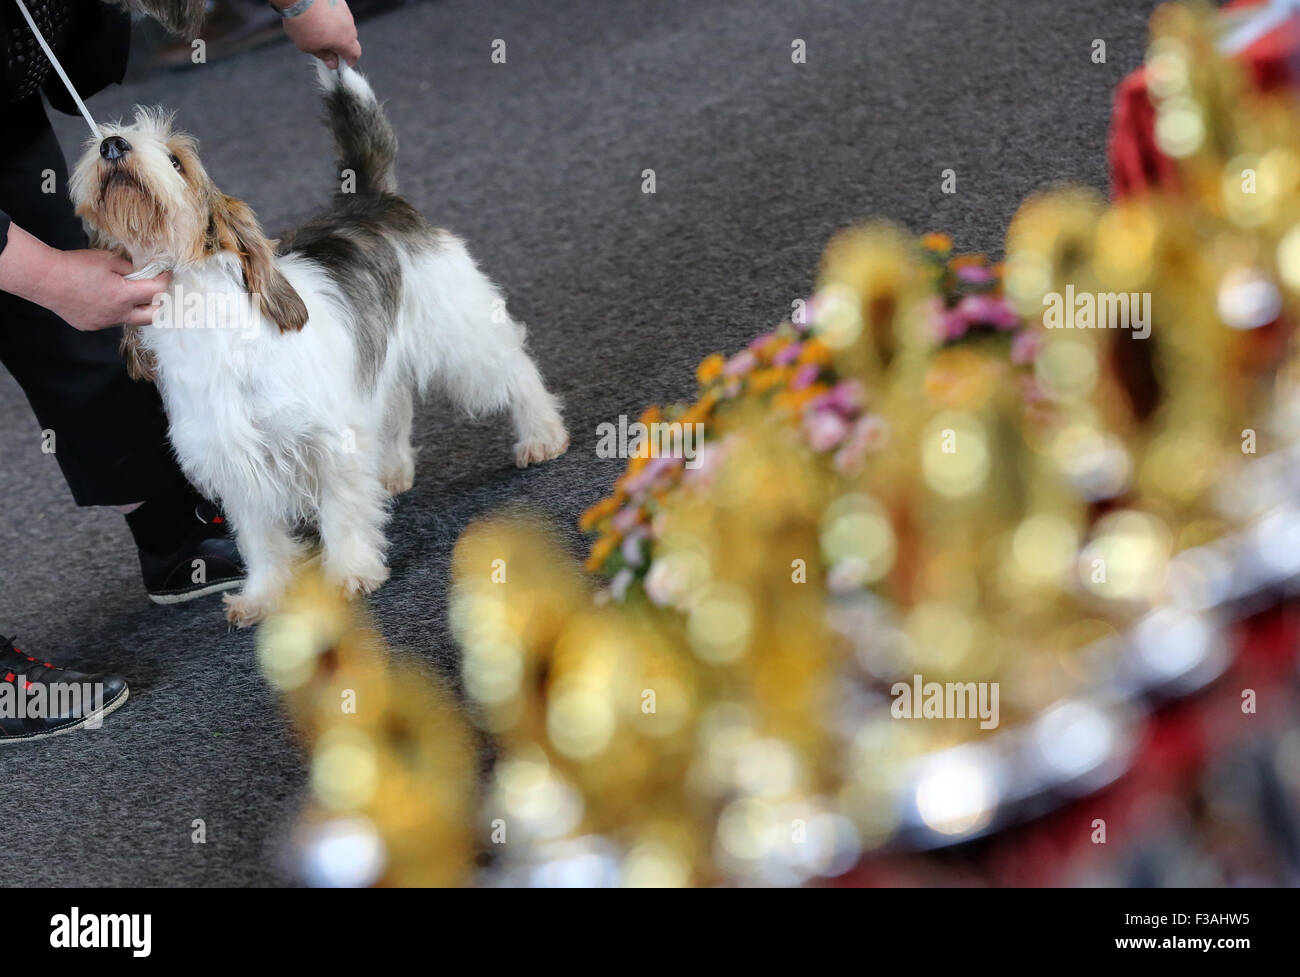 Rostock, Germany. 03rd Oct, 2015. A Petit Basset Griffon Vendeen is presented to the jury, with the trophies to be awarded pictured in the foreground, at the 12th Thoroughbred Dog Show in Rostock, Germany, 03 October 2015. Some 2,000 dogs of 247 different breeds will be showcased during the two-day trade fair in Rostock. Photo: BERND WUESTNECK/dpa/Alamy Live News Stock Photo